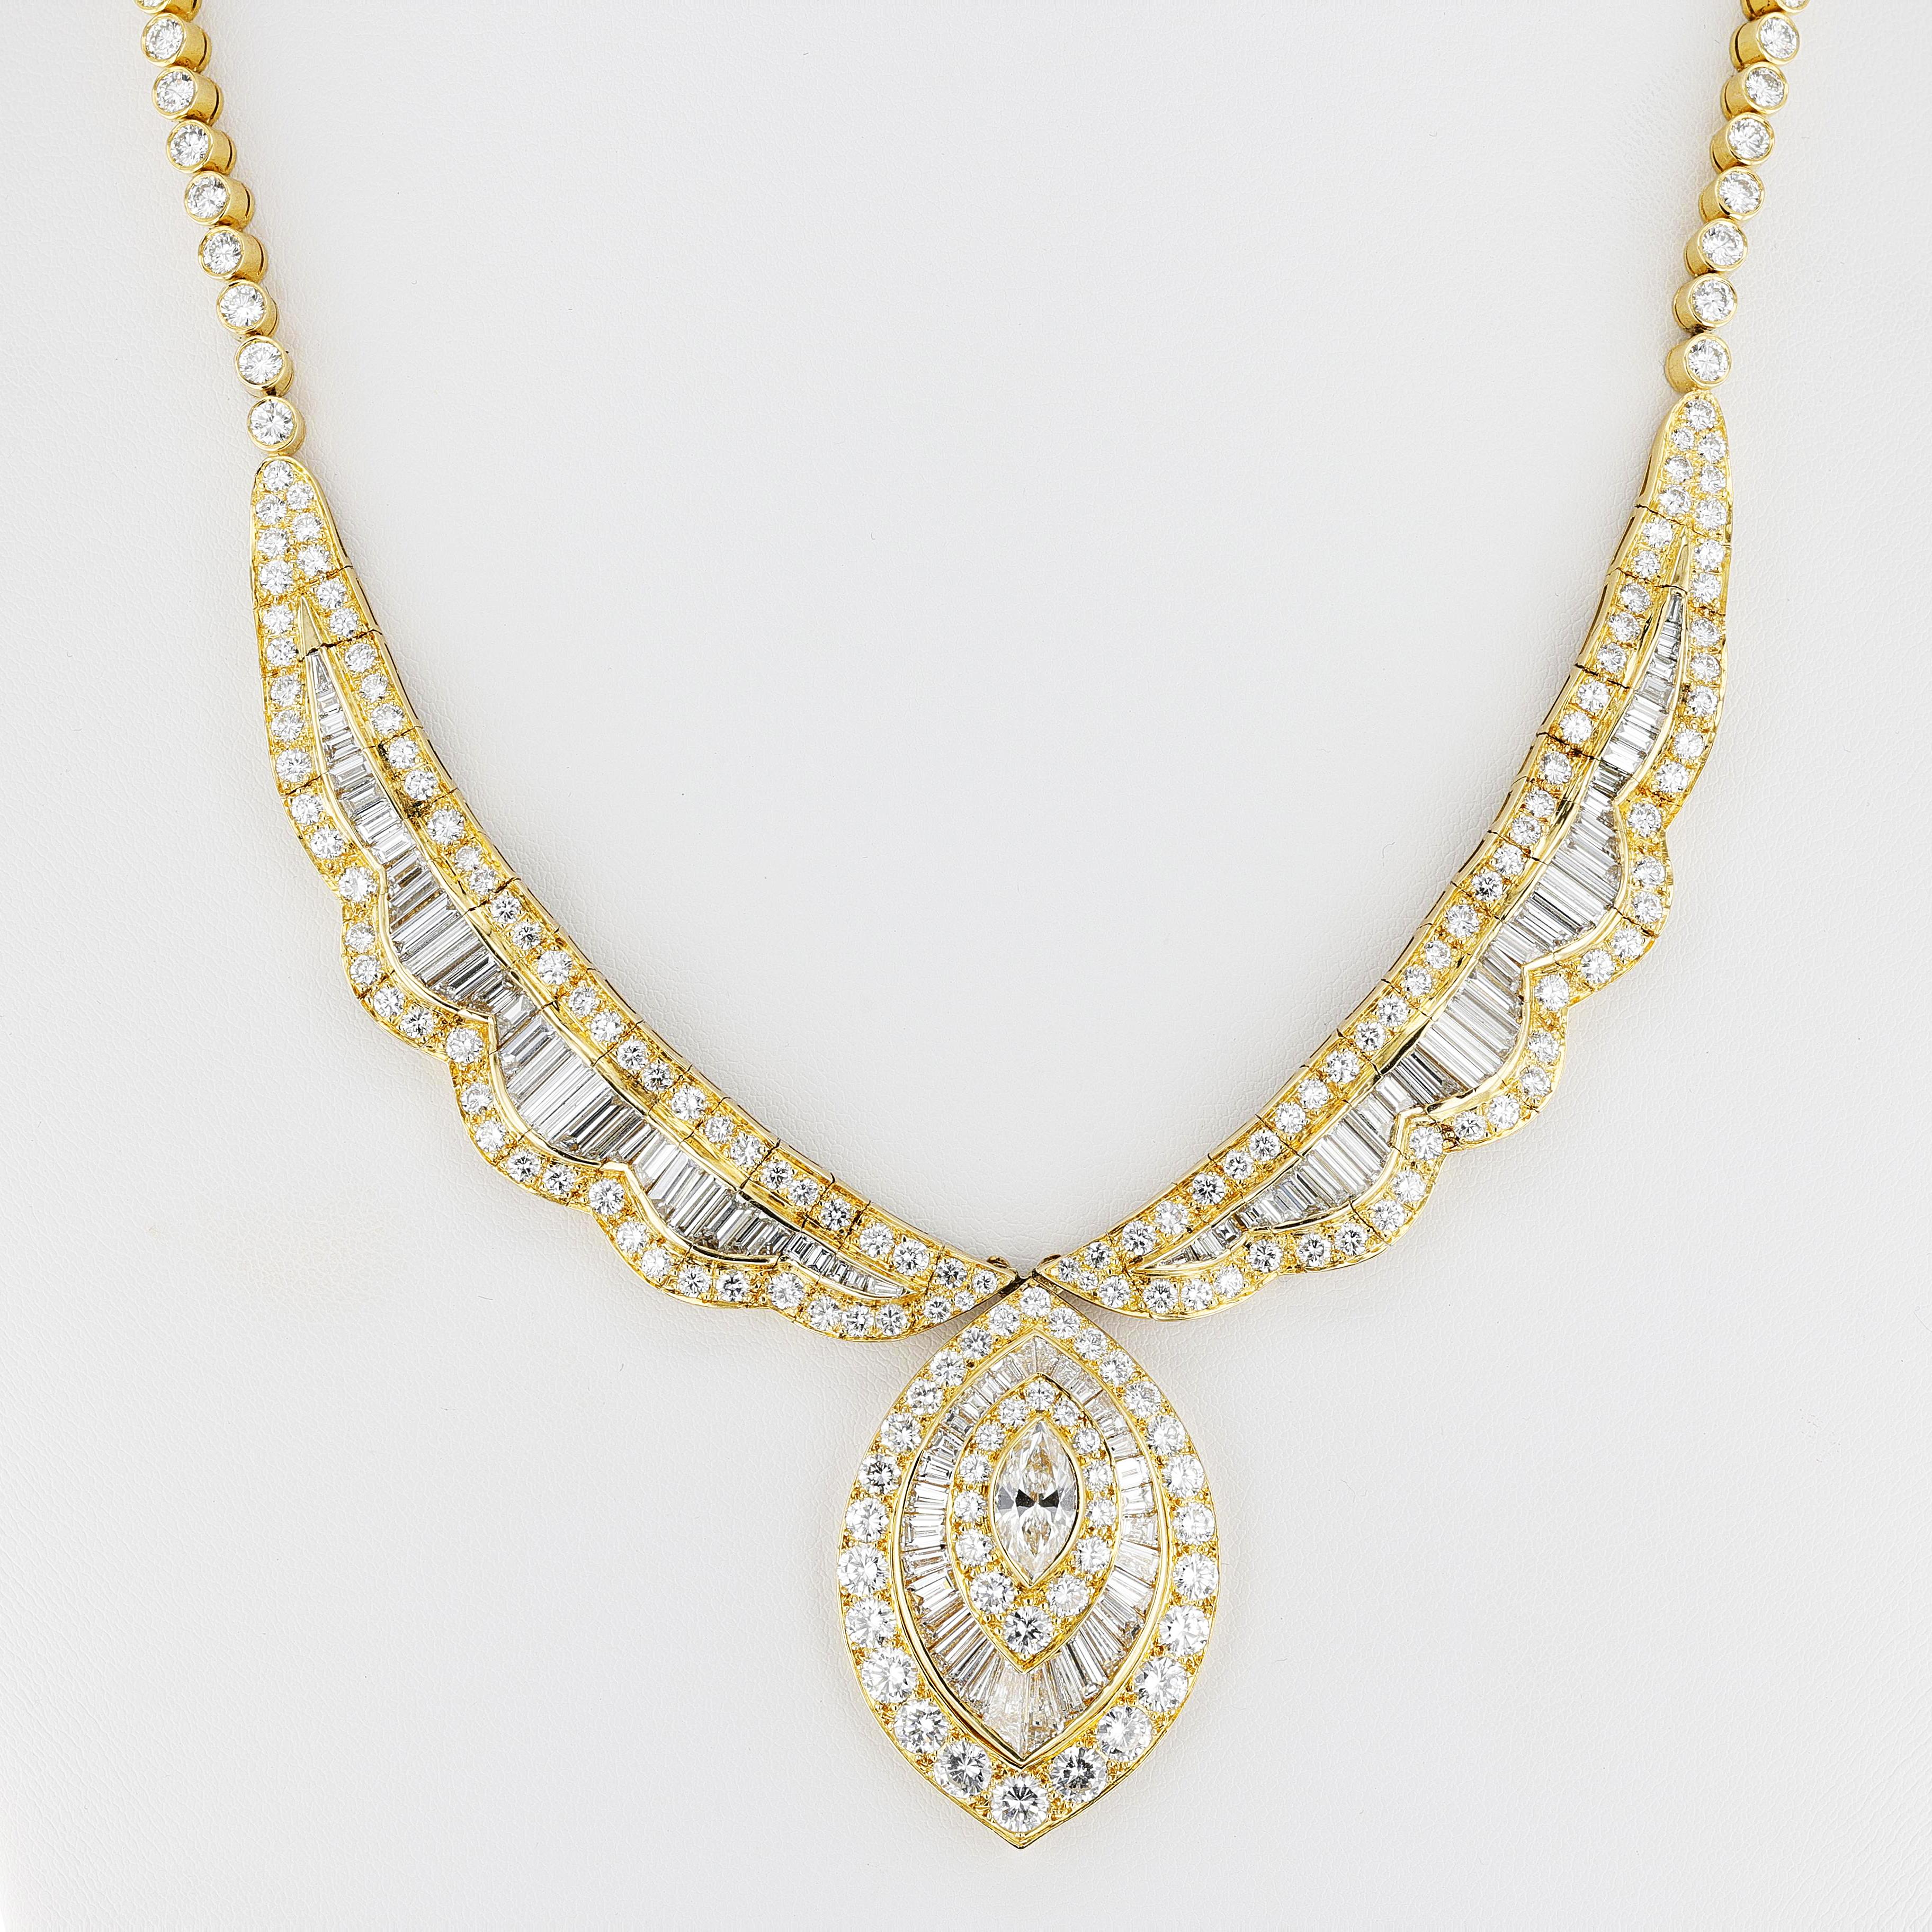 French Van Cleef & Arpels Marquise Center Diamond Necklace. The diamonds weigh a total of appx. 25 carats. The center marquise diamond weighs appx. 1.50 carats. The length is 17.5 inches. Signed & numbered NY54933. Total weight: 53.20 grams